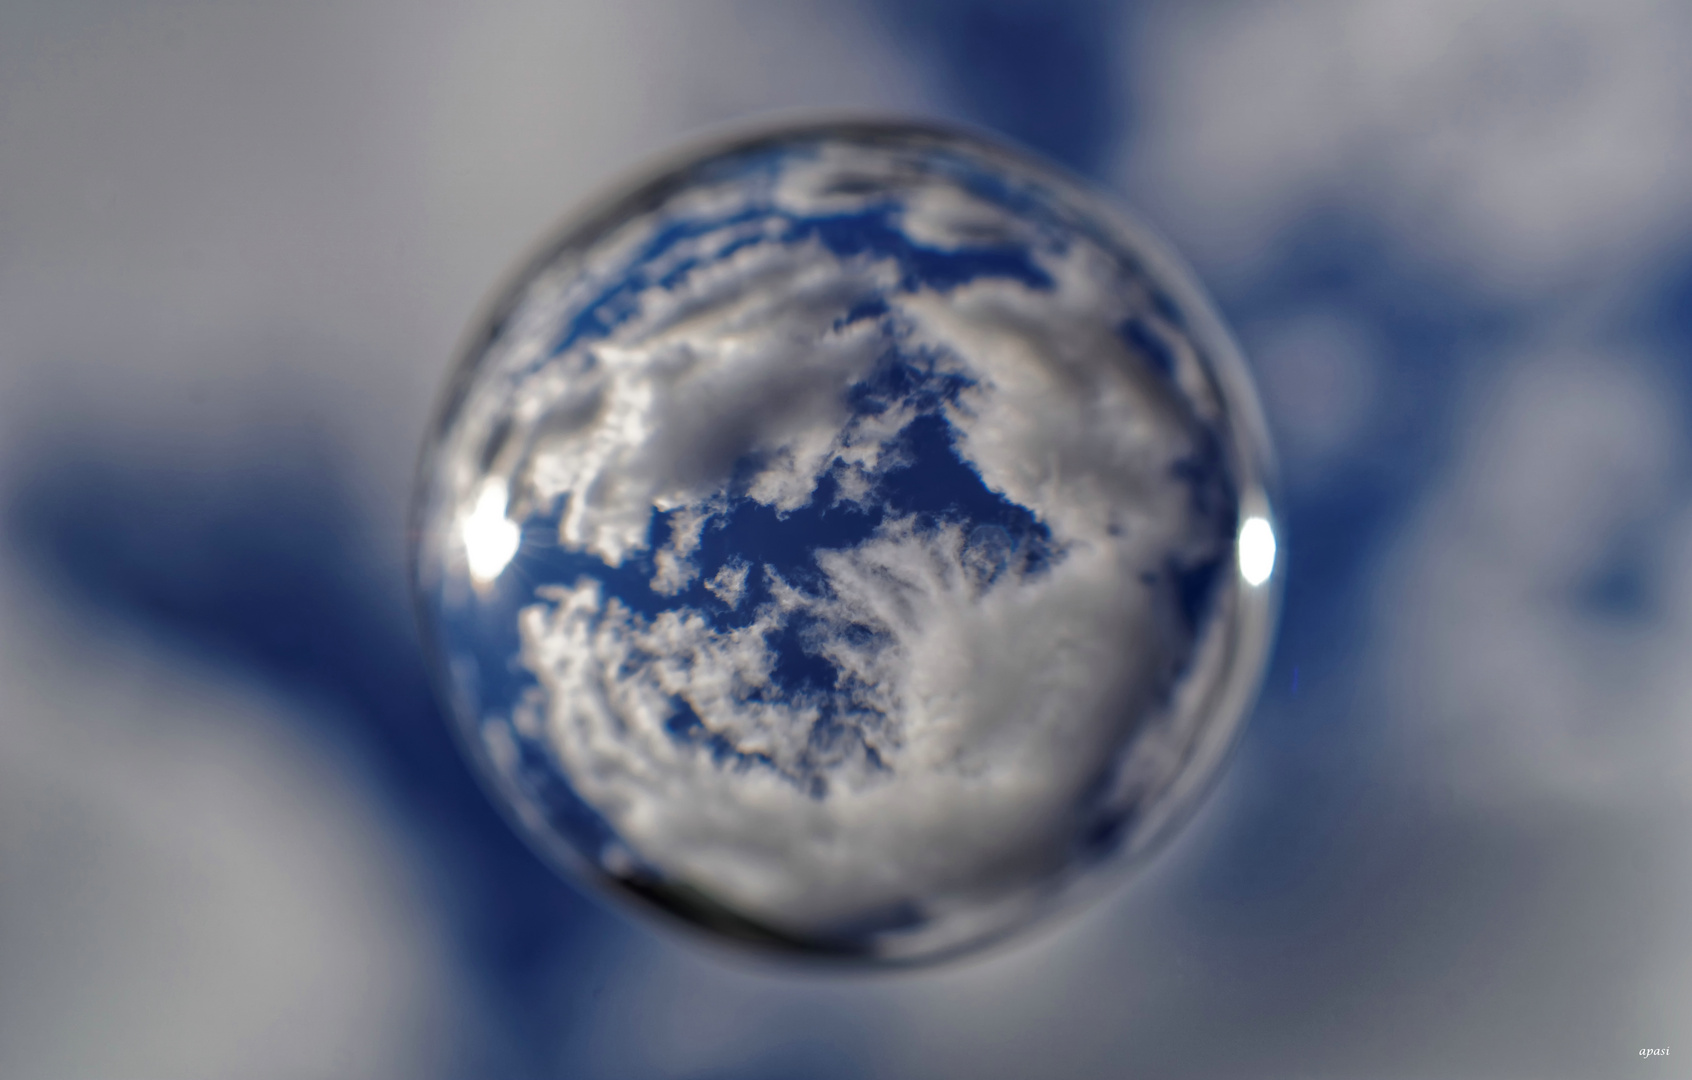 Clouds in the Sphere